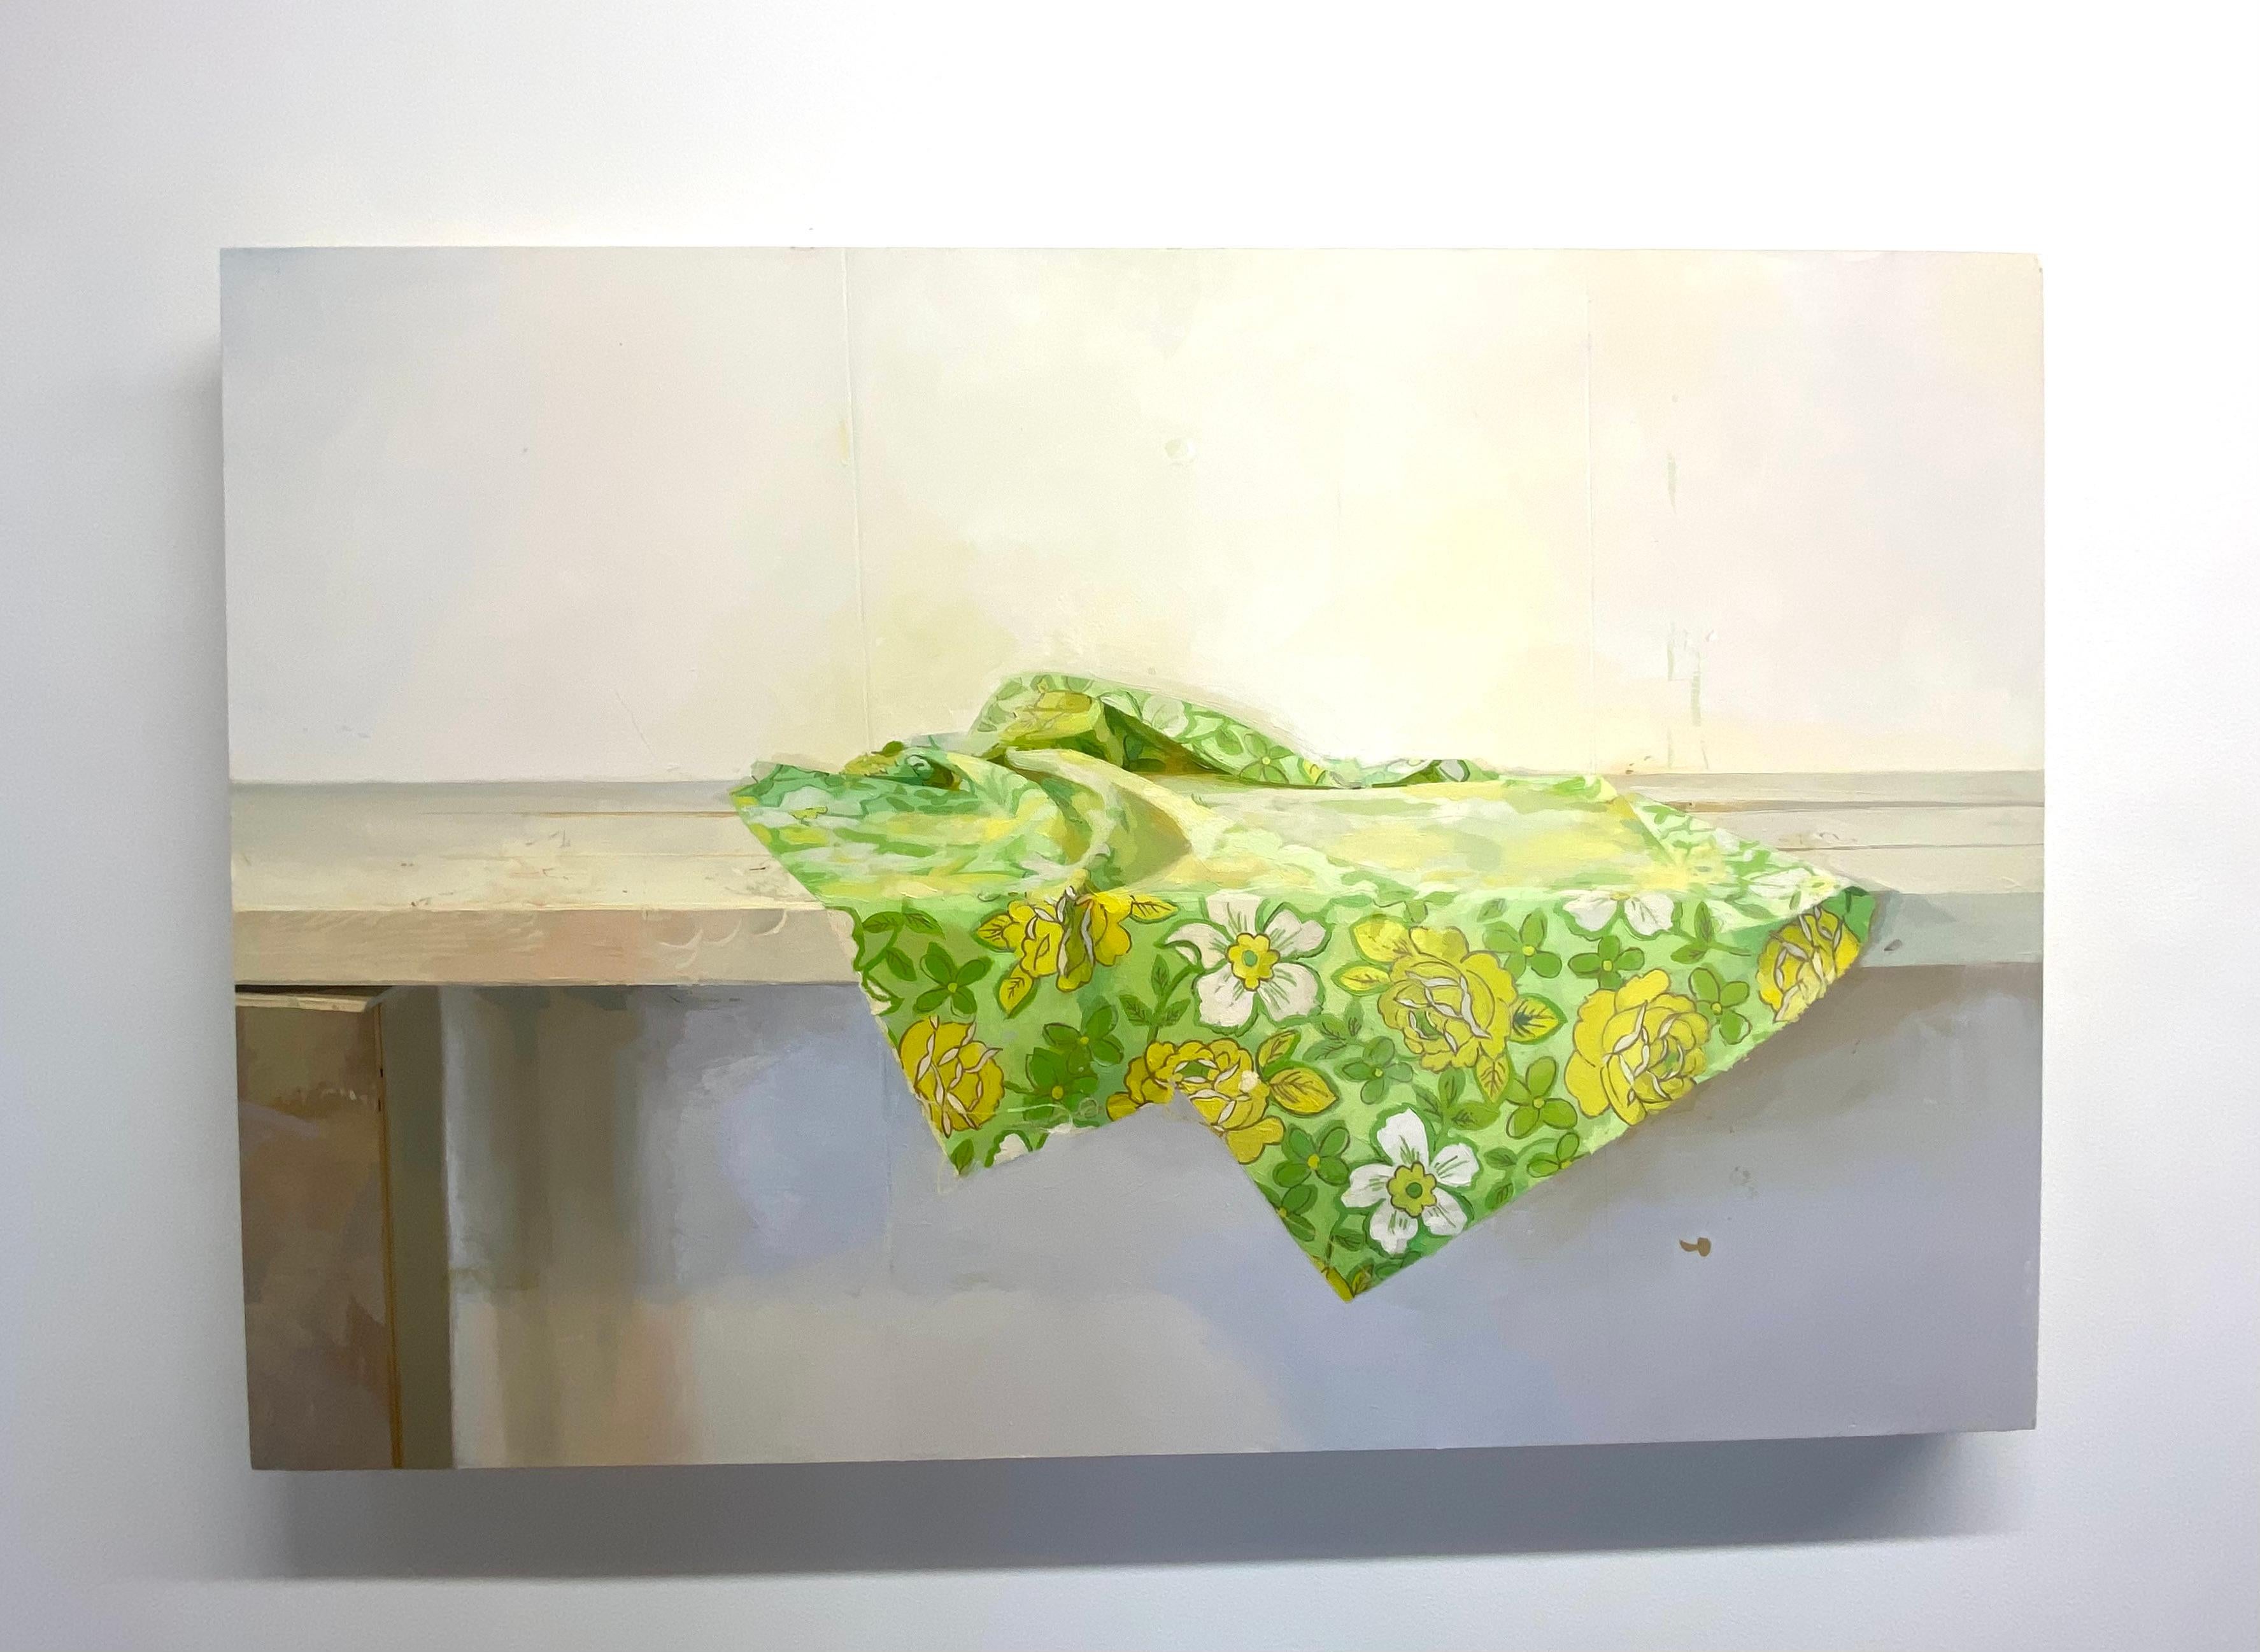 Fragment, Still Life, Botanical Patterned Green, Yellow Fabric, Wooden Table - Contemporary Painting by Brett Eberhardt